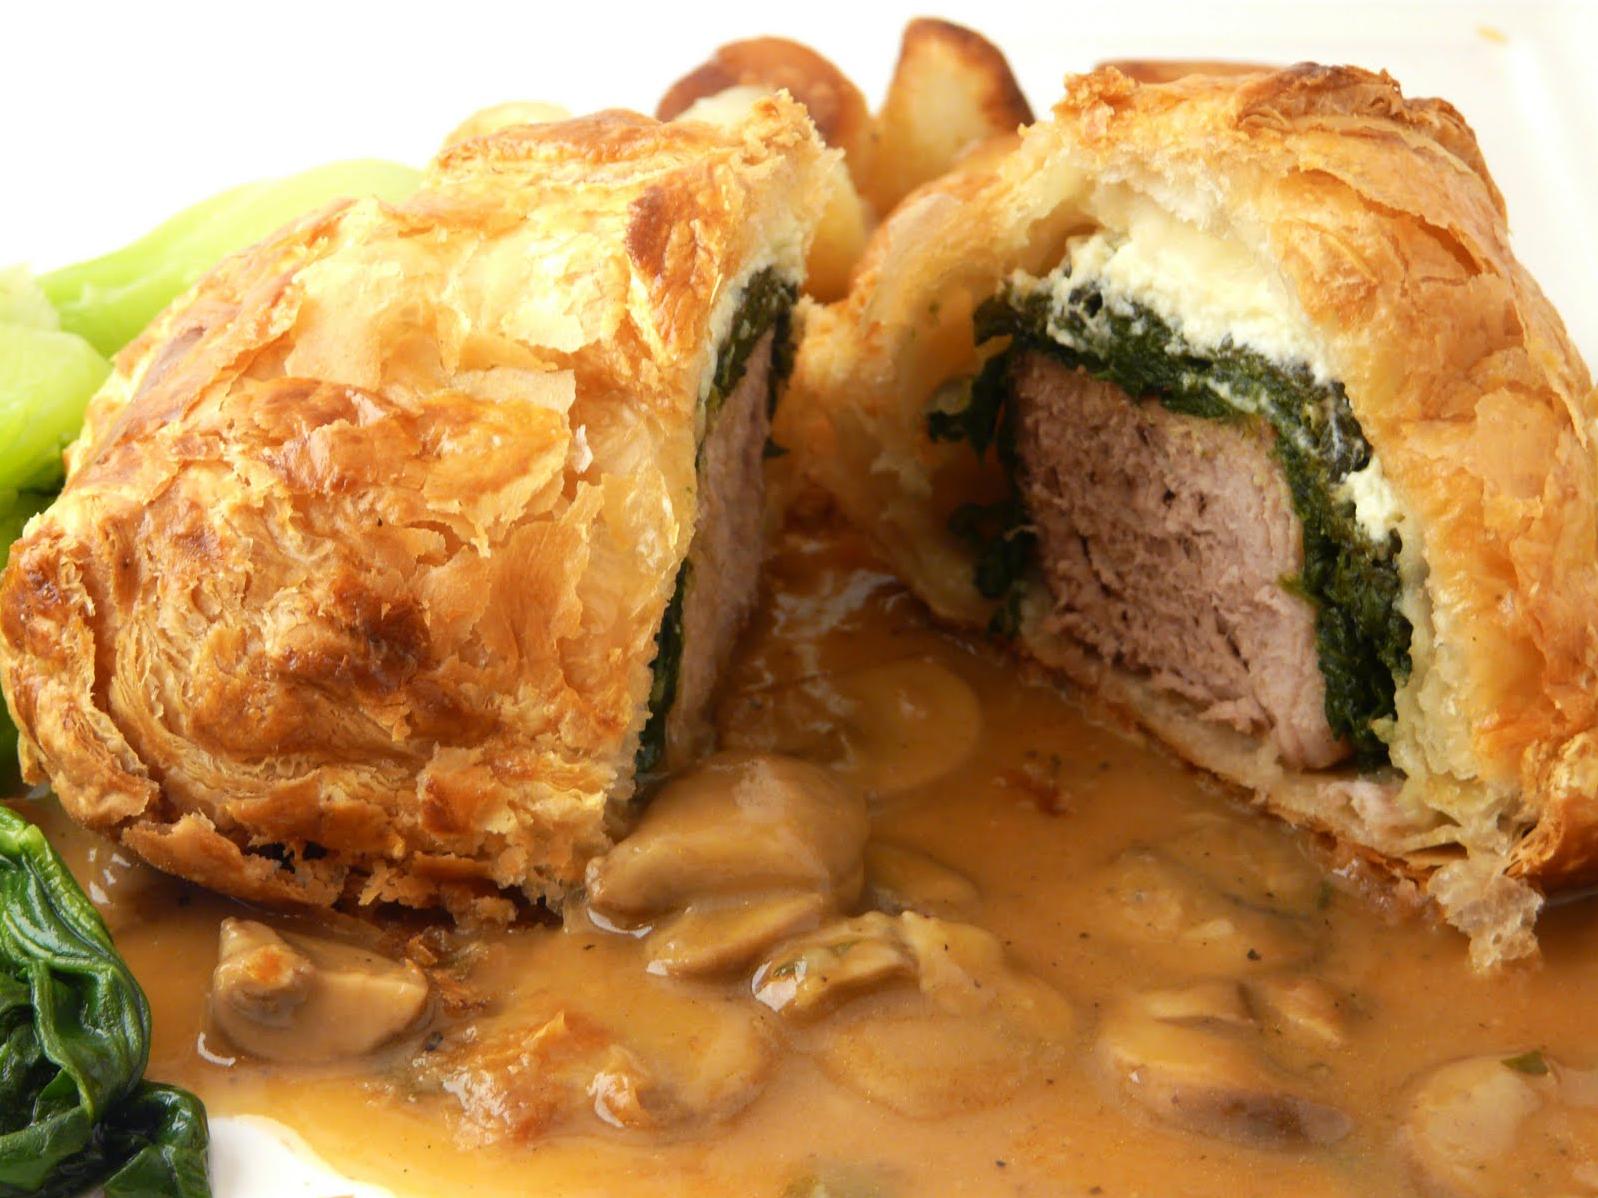  A juicy pork tenderloin wrapped in a flaky pastry crust - who can resist?